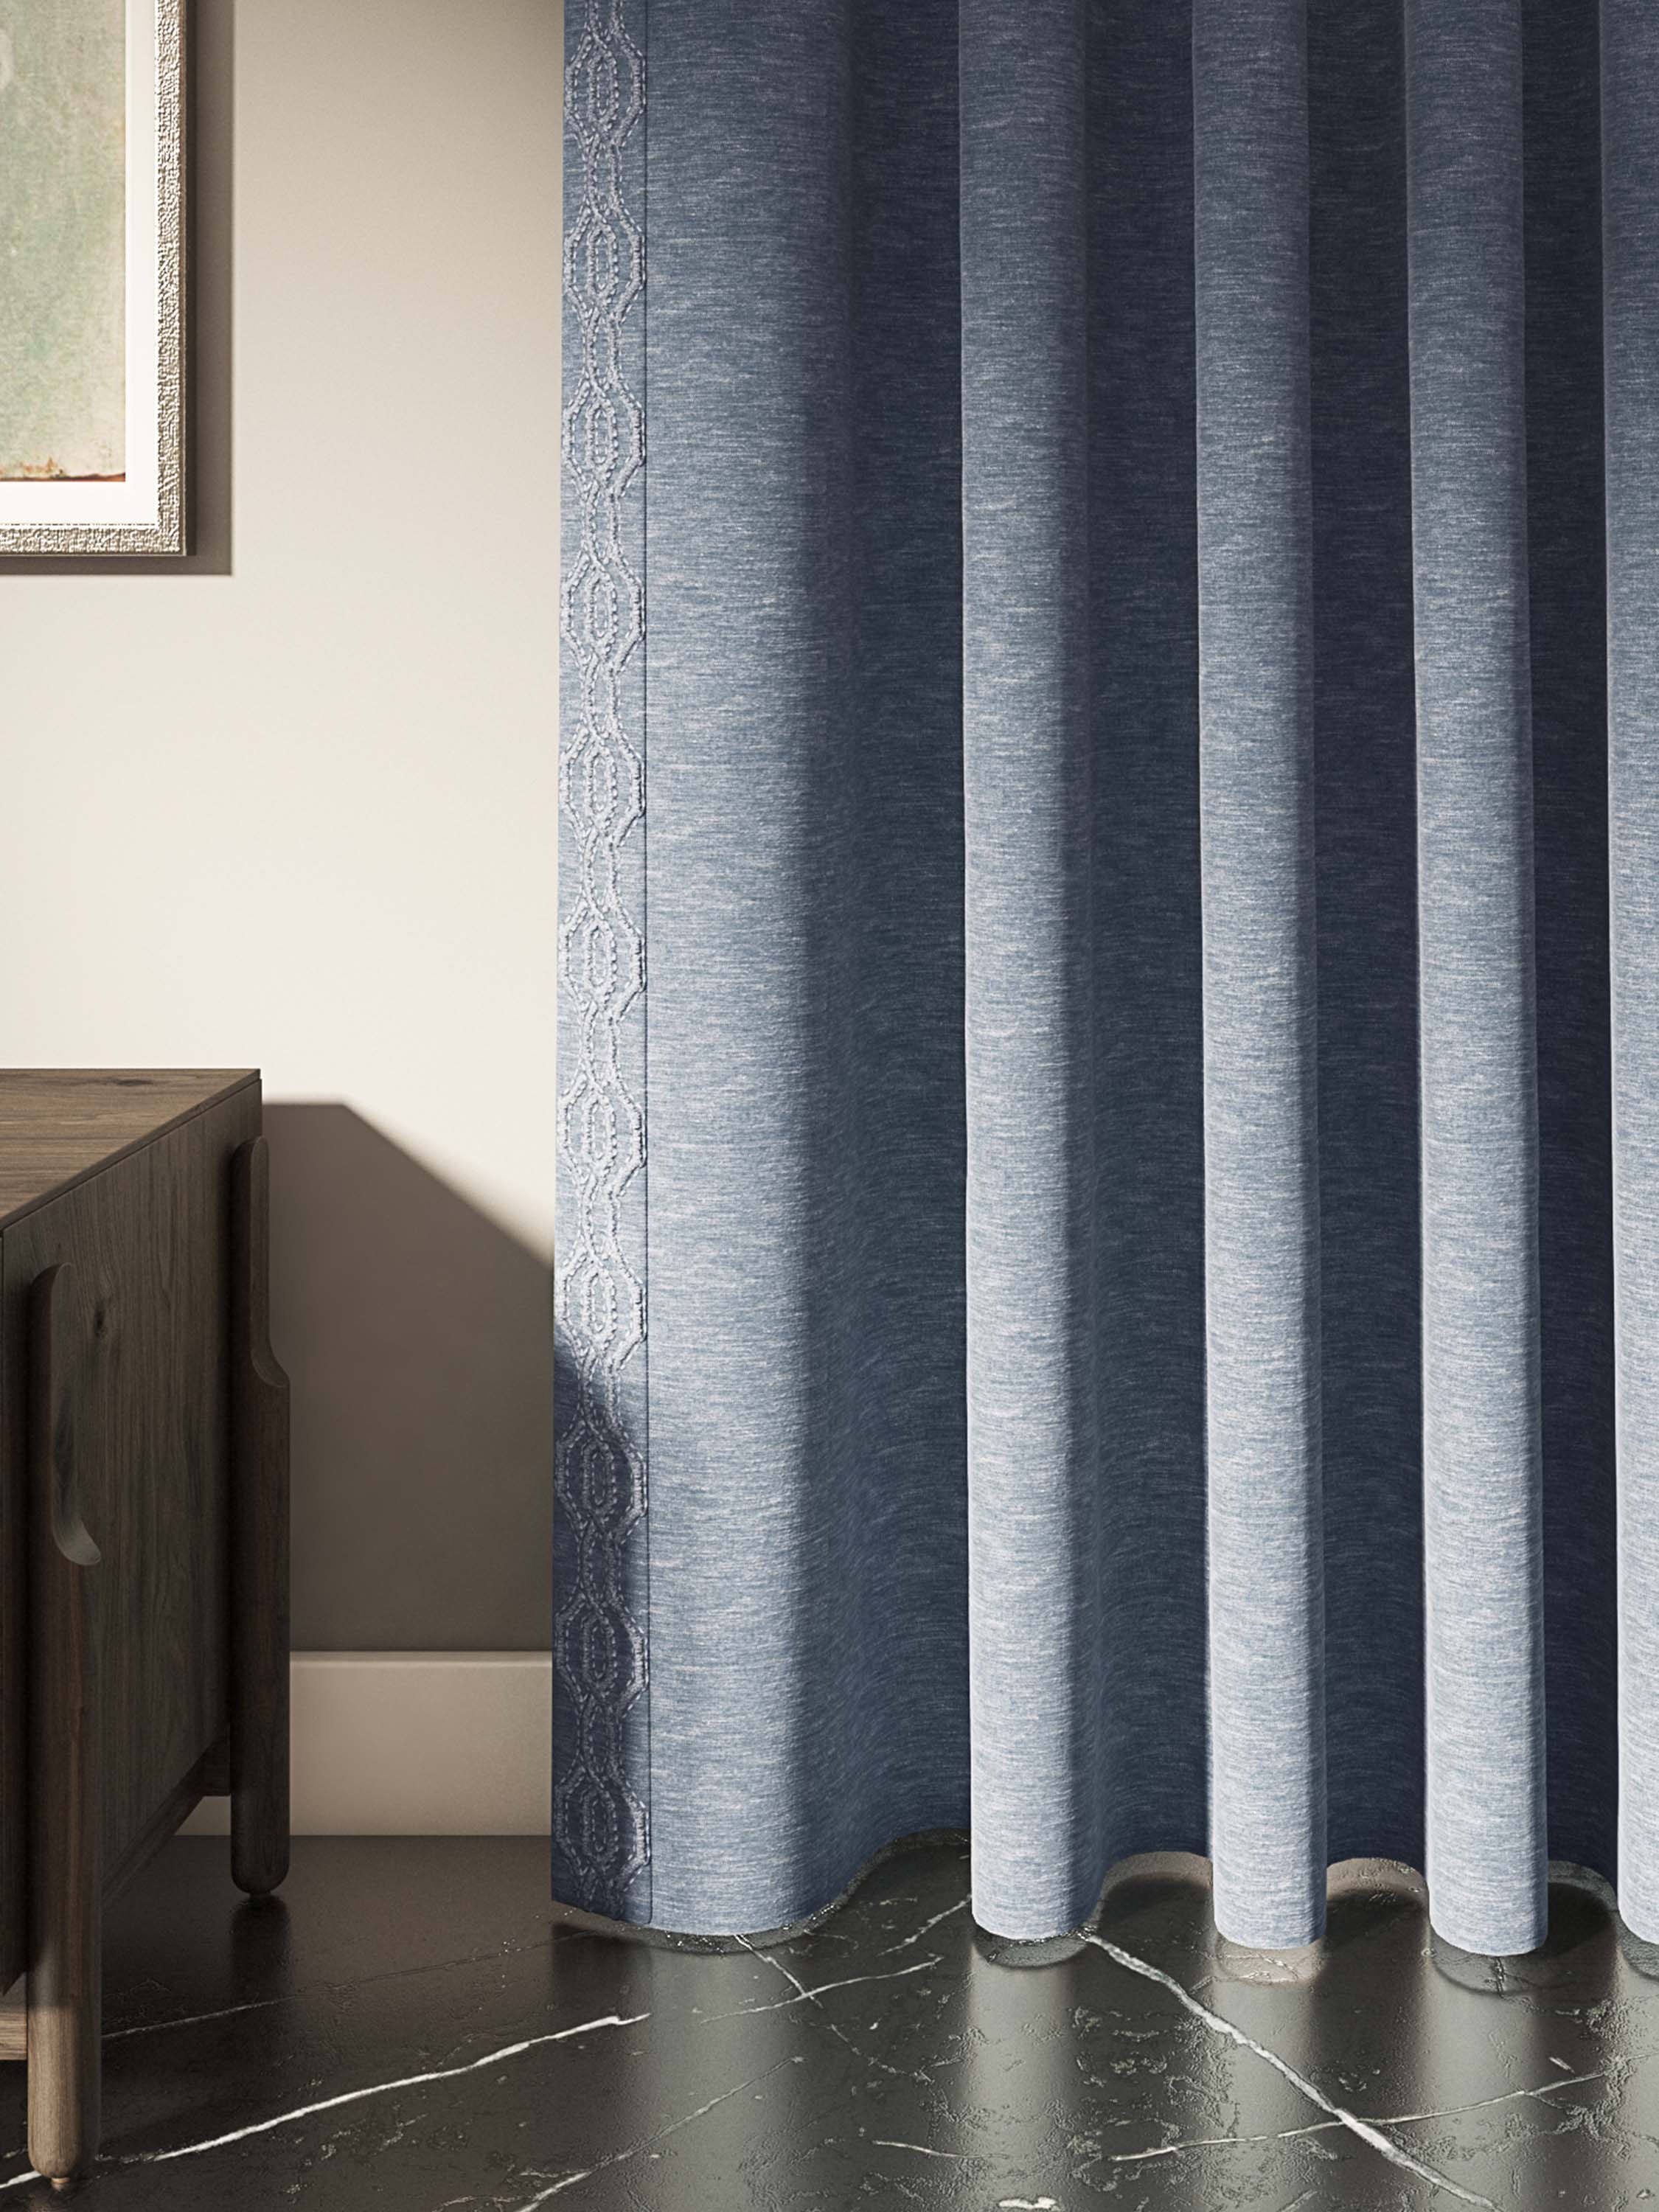  Luxury Designer Curtains with Geometric Embroidery